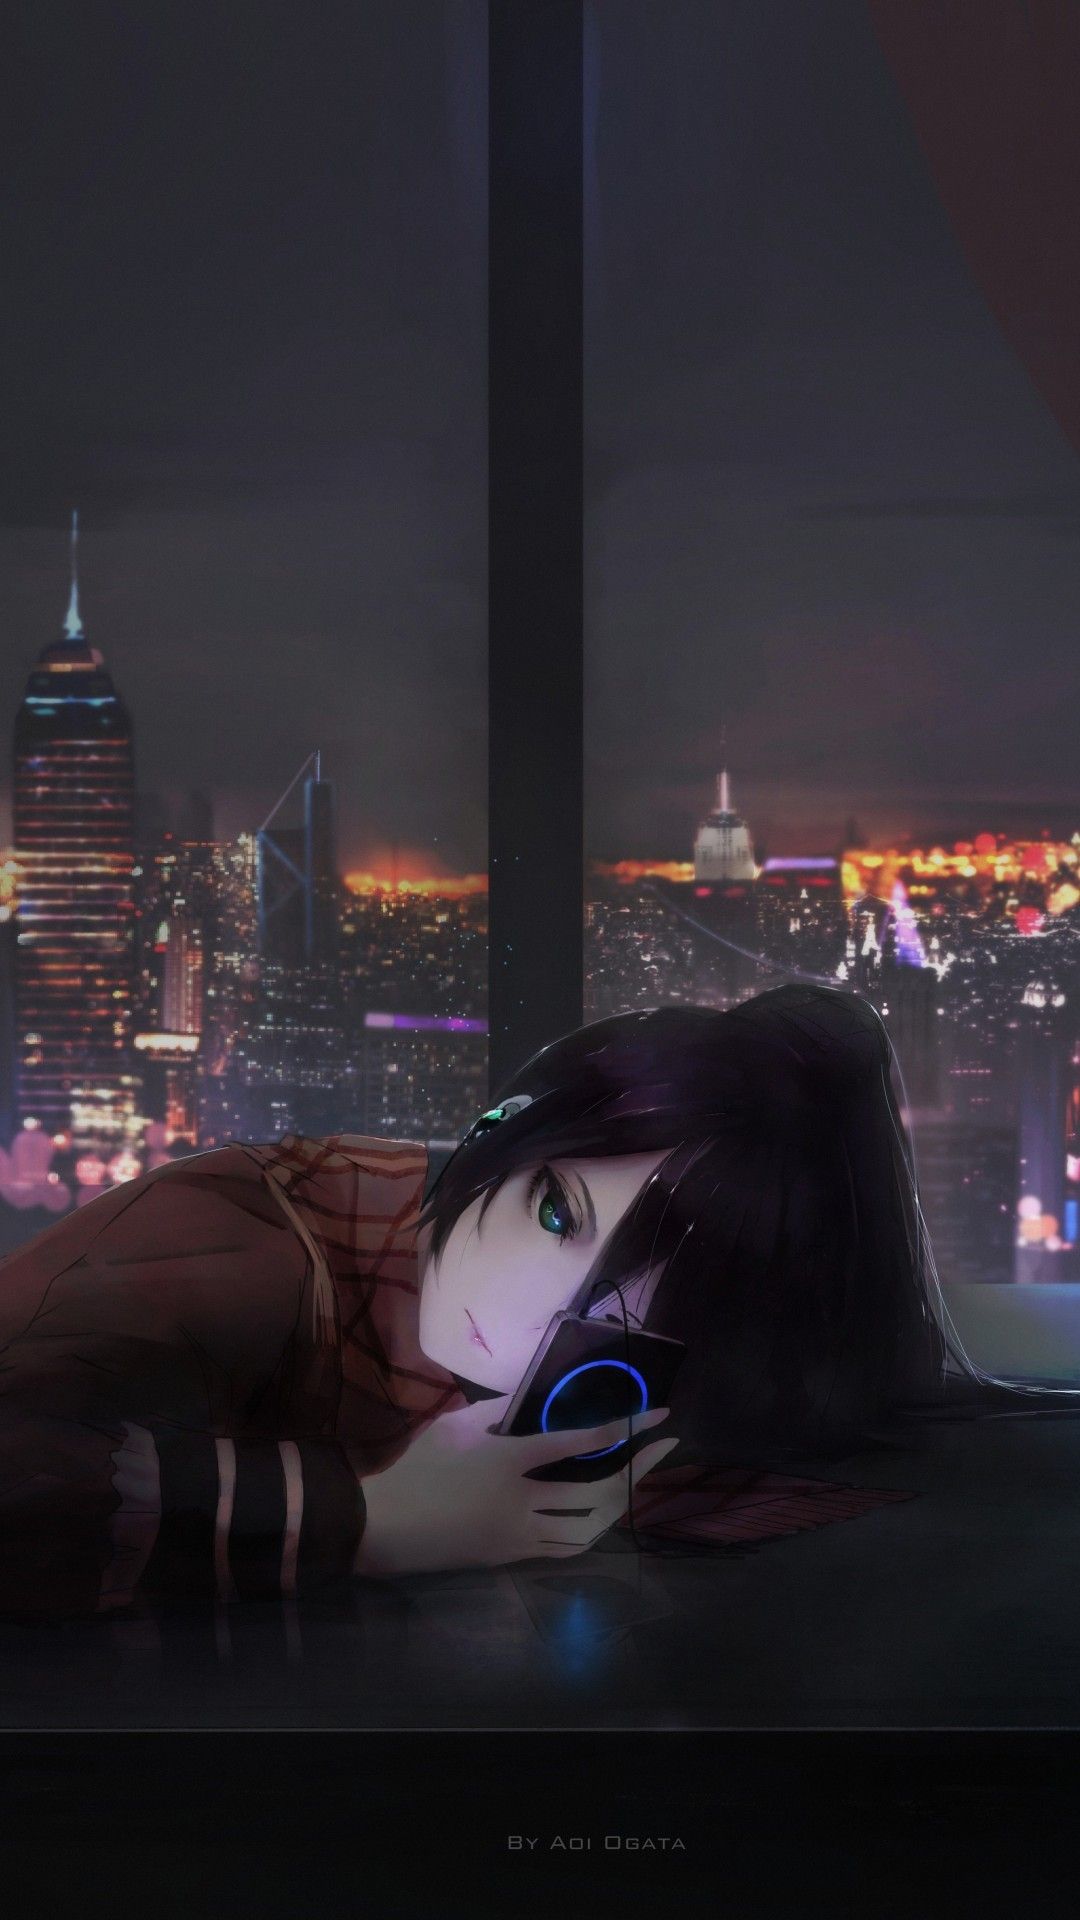 Download 1080x1920 Anime Girl, Depressed, Cityscape, Music, Scarf Wallpaper for iPhone iPhone 7 Plus, iPhone 6+, Sony Xperia Z, HTC One